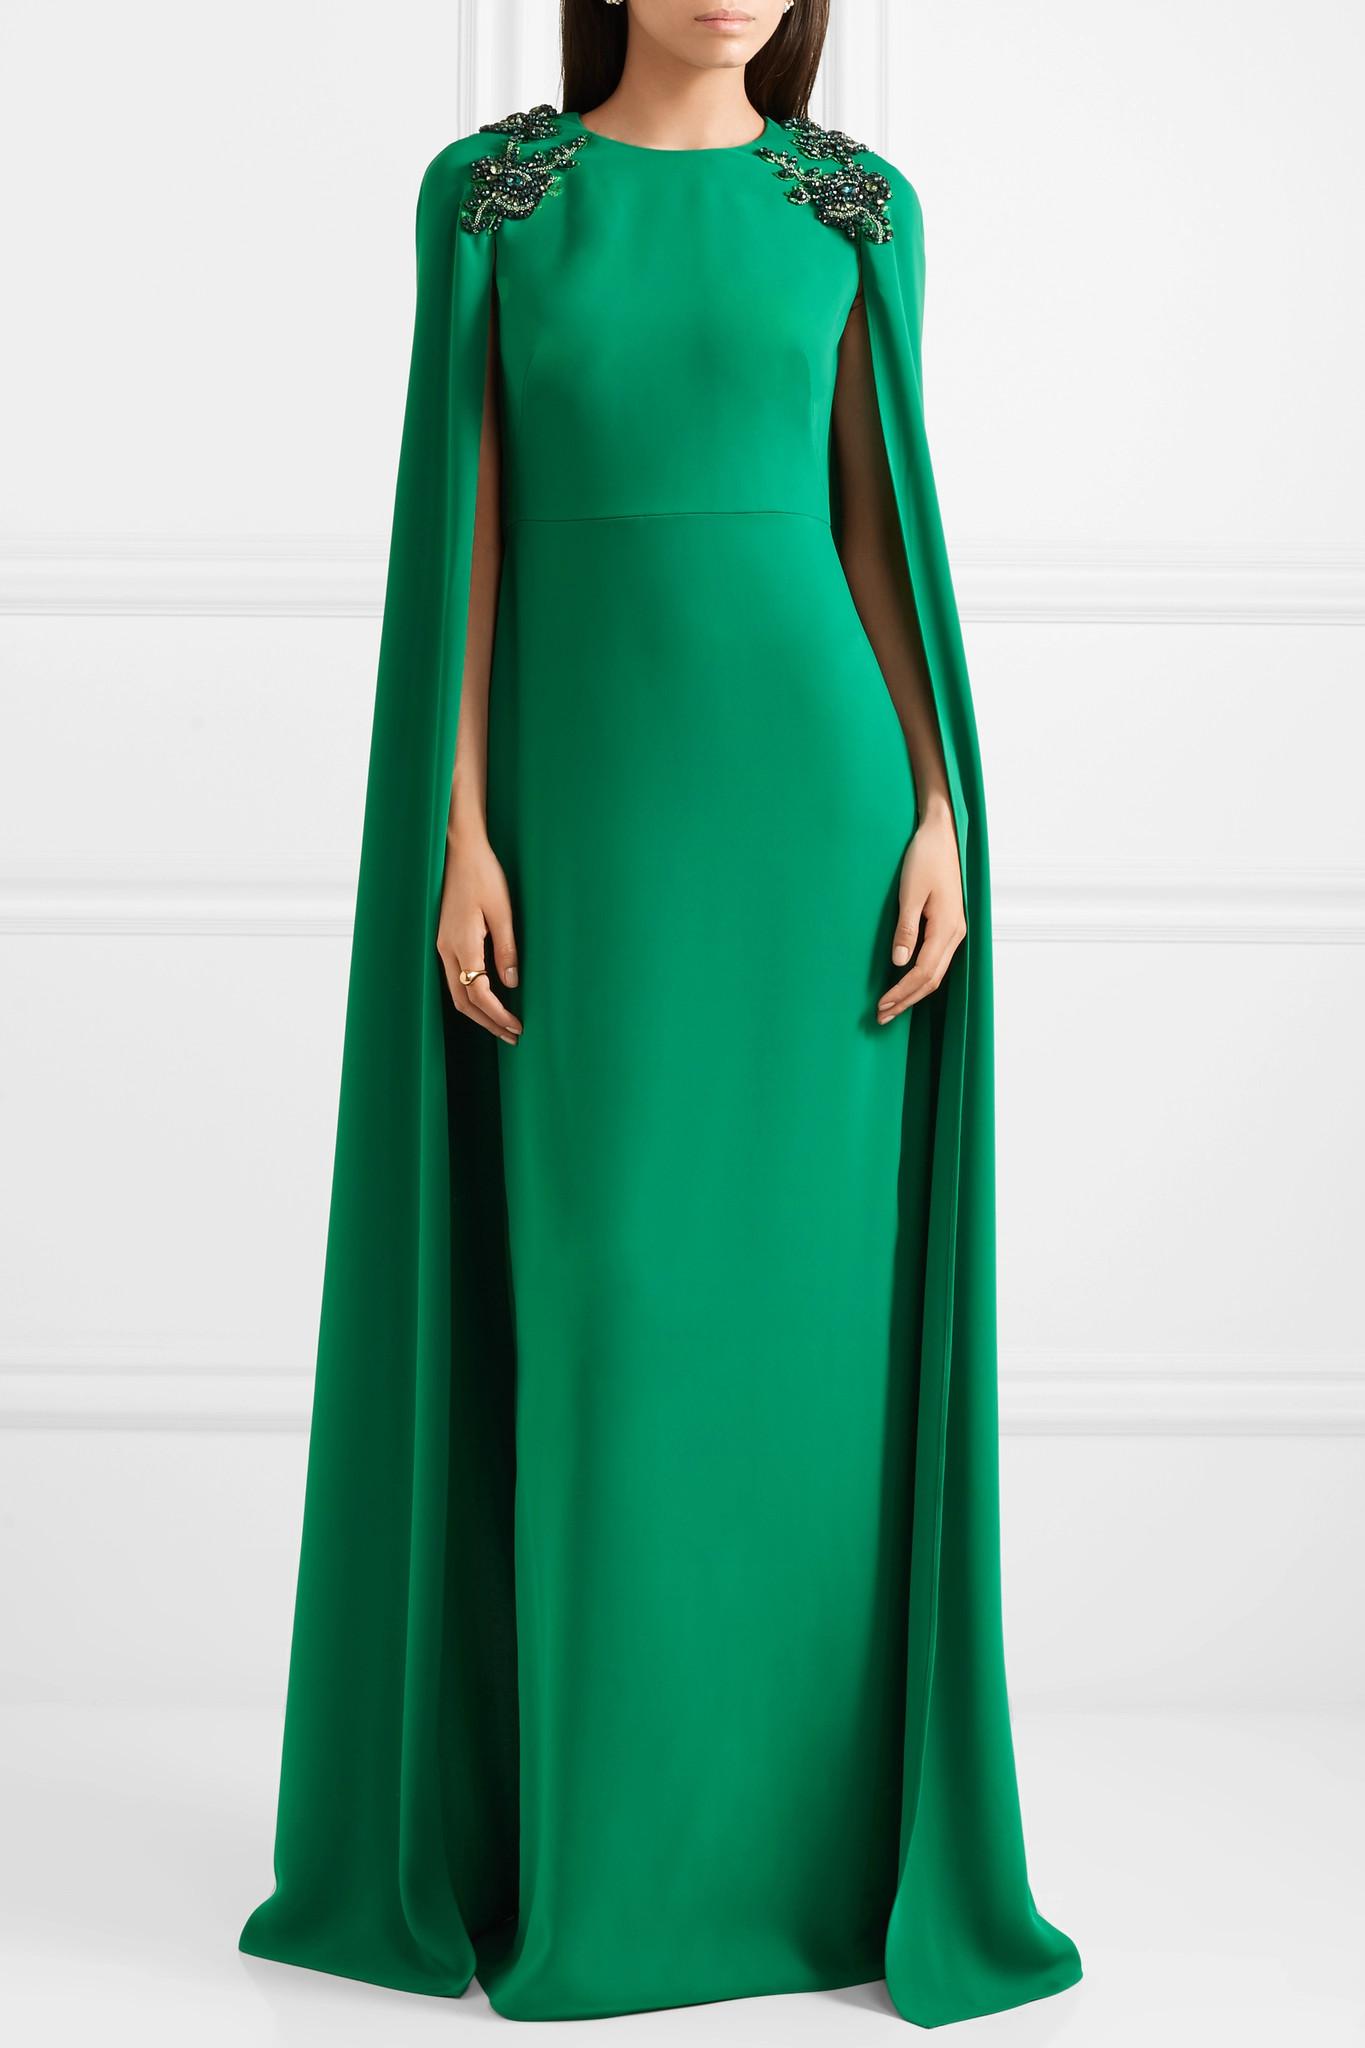 Marchesa notte Cape-effect Embellished Crepe Gown in Emerald (Green) - Lyst